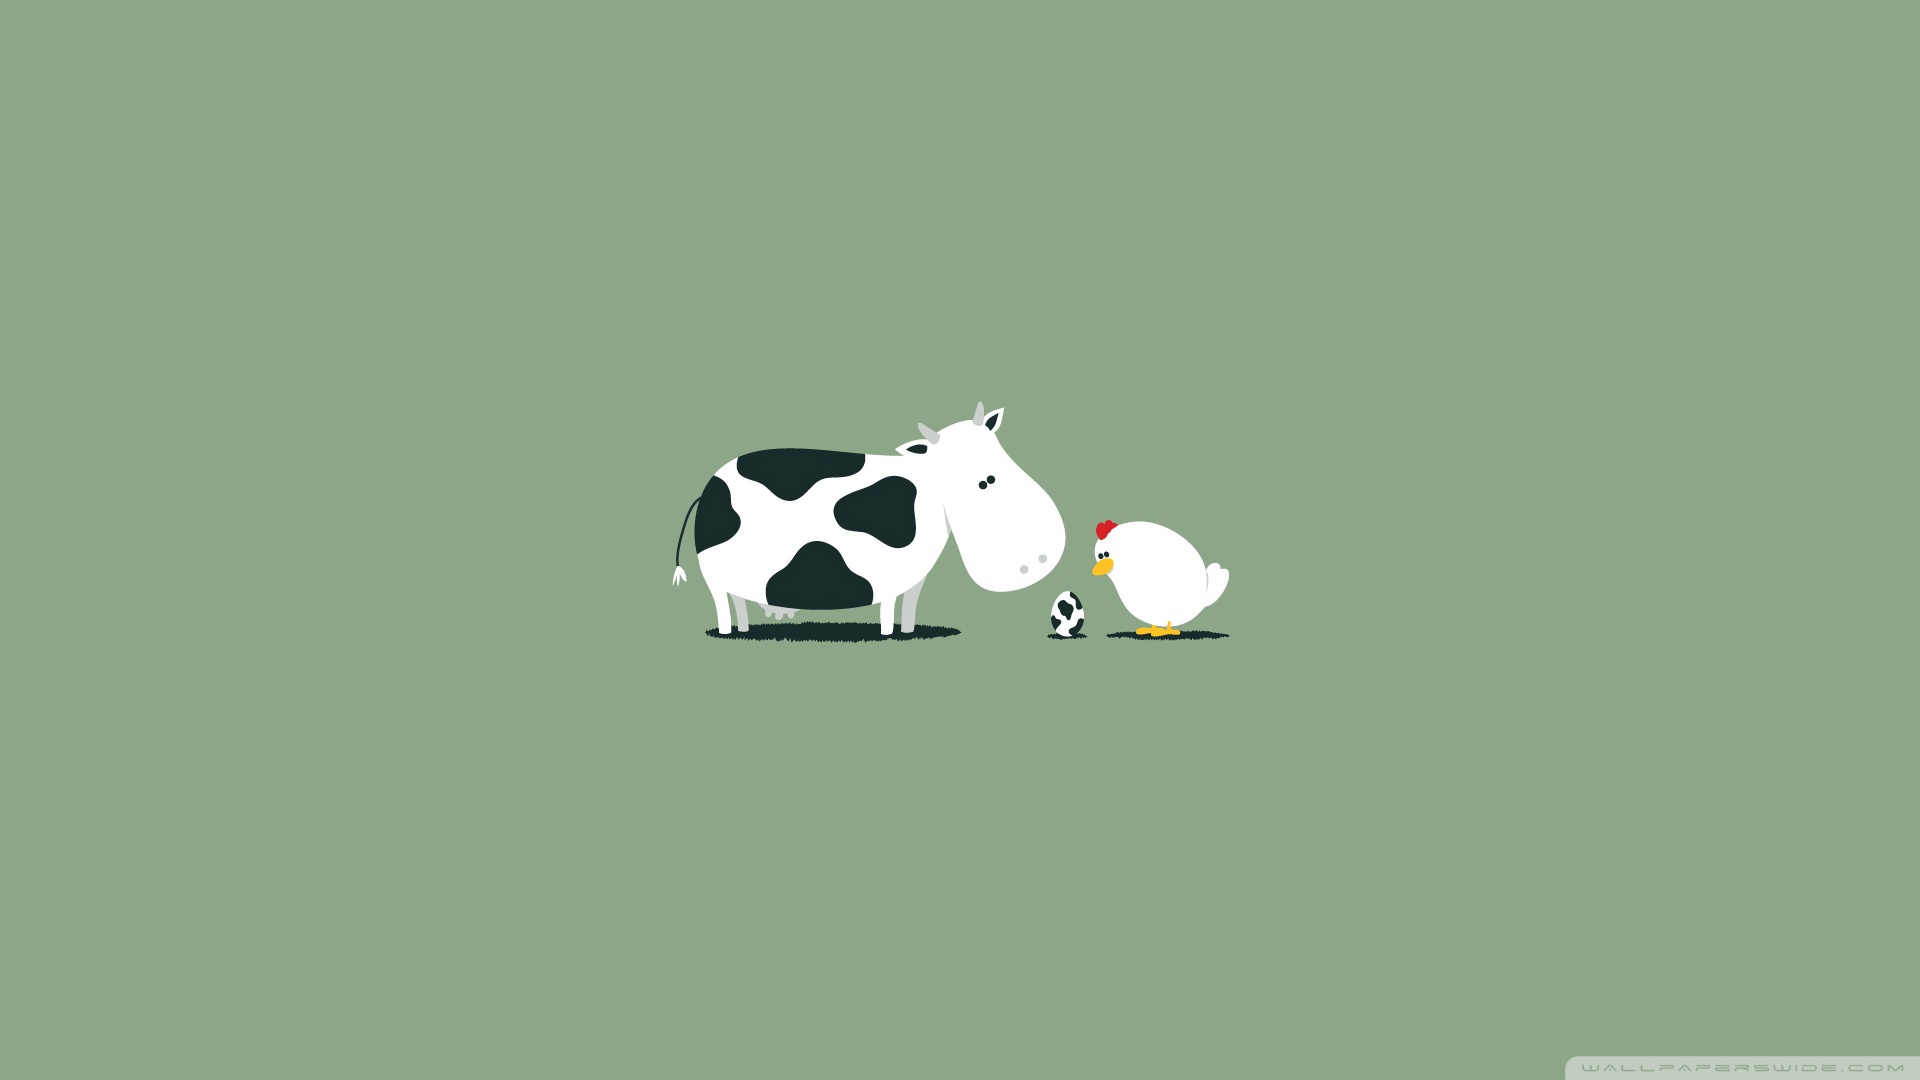 Have you ever seen a cow lay an egg? Neither have we, but our funny cow egg wallpapers imagine just that. These quirky illustrations are guaranteed to brighten up your workday and make your coworkers wonder what’s so hilarious.